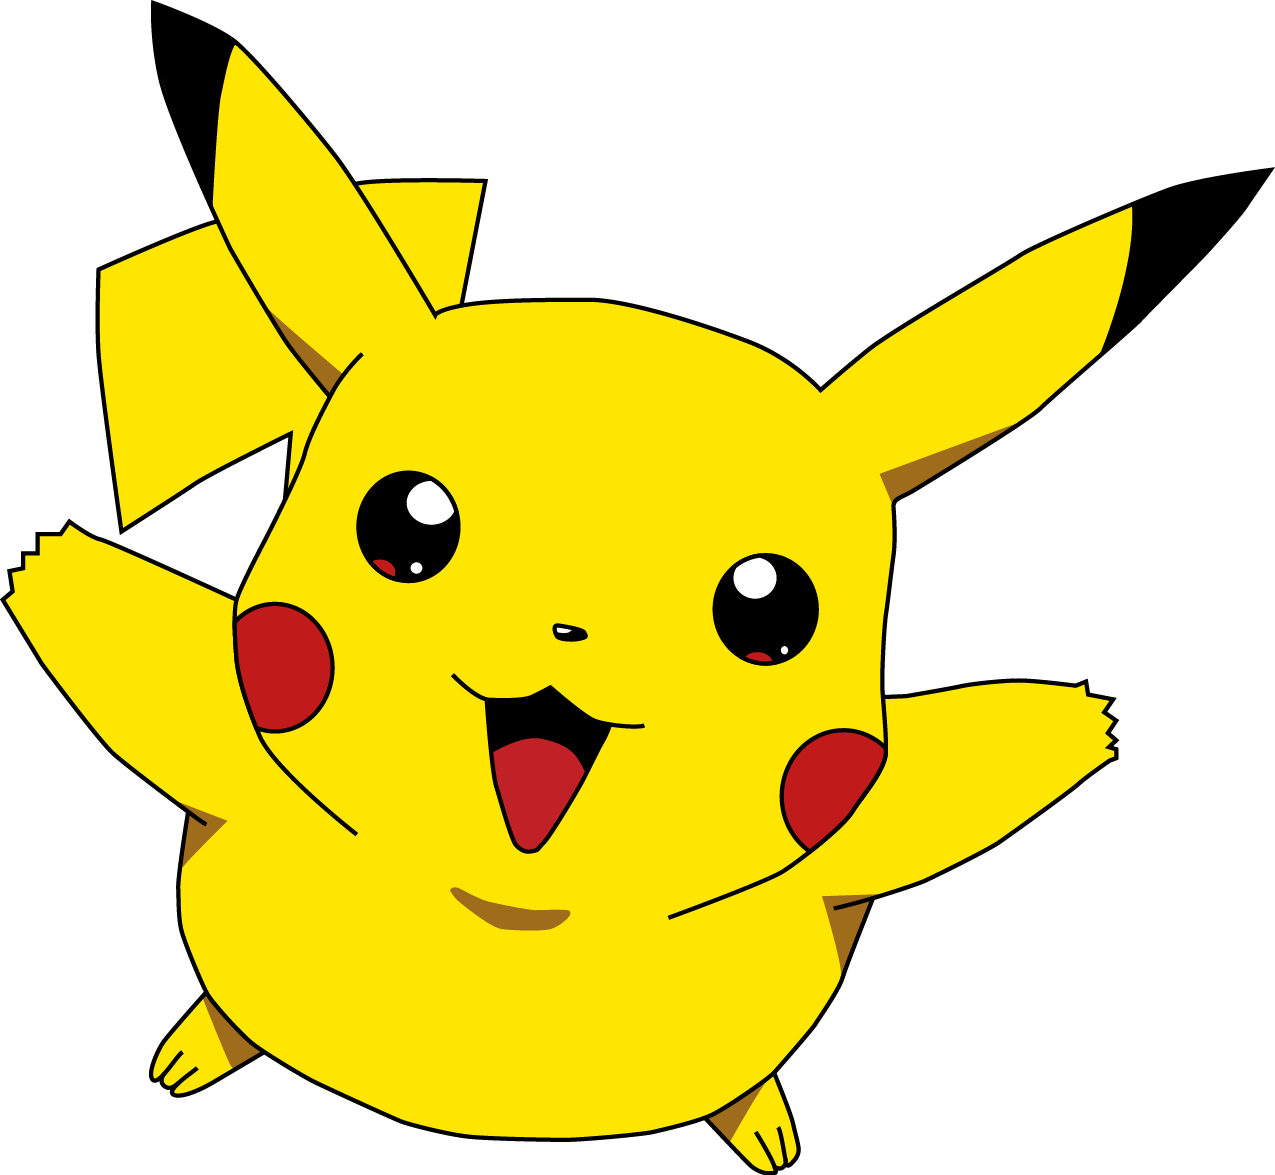 New Detective Game From The Pokemon Pany Will Feature Pikachu